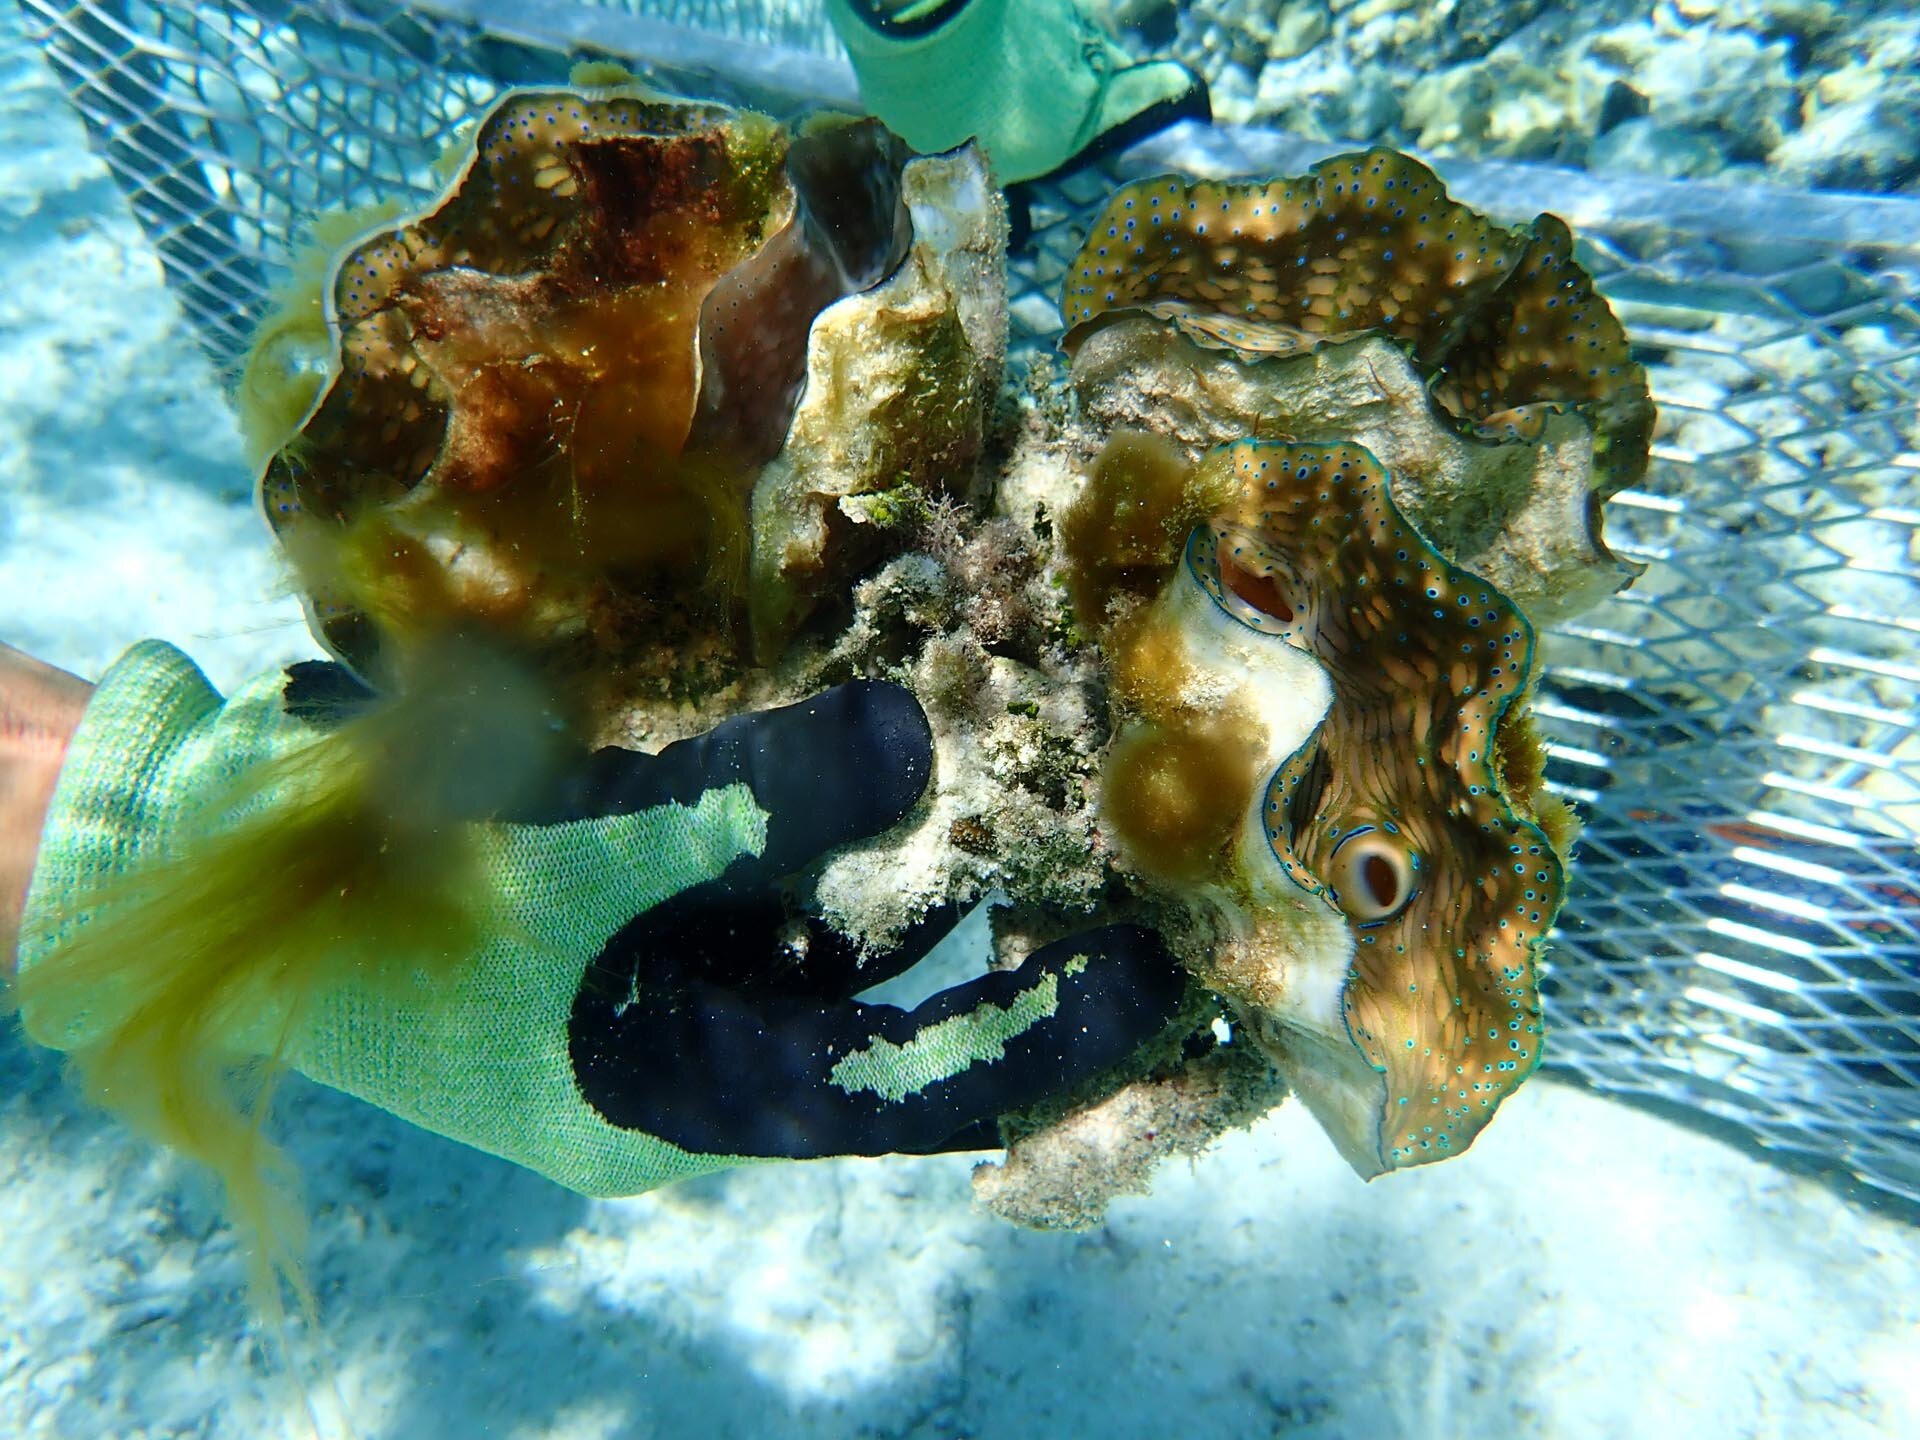 Giant Clams being transferred into larger cage ©Katy Miller.jpg